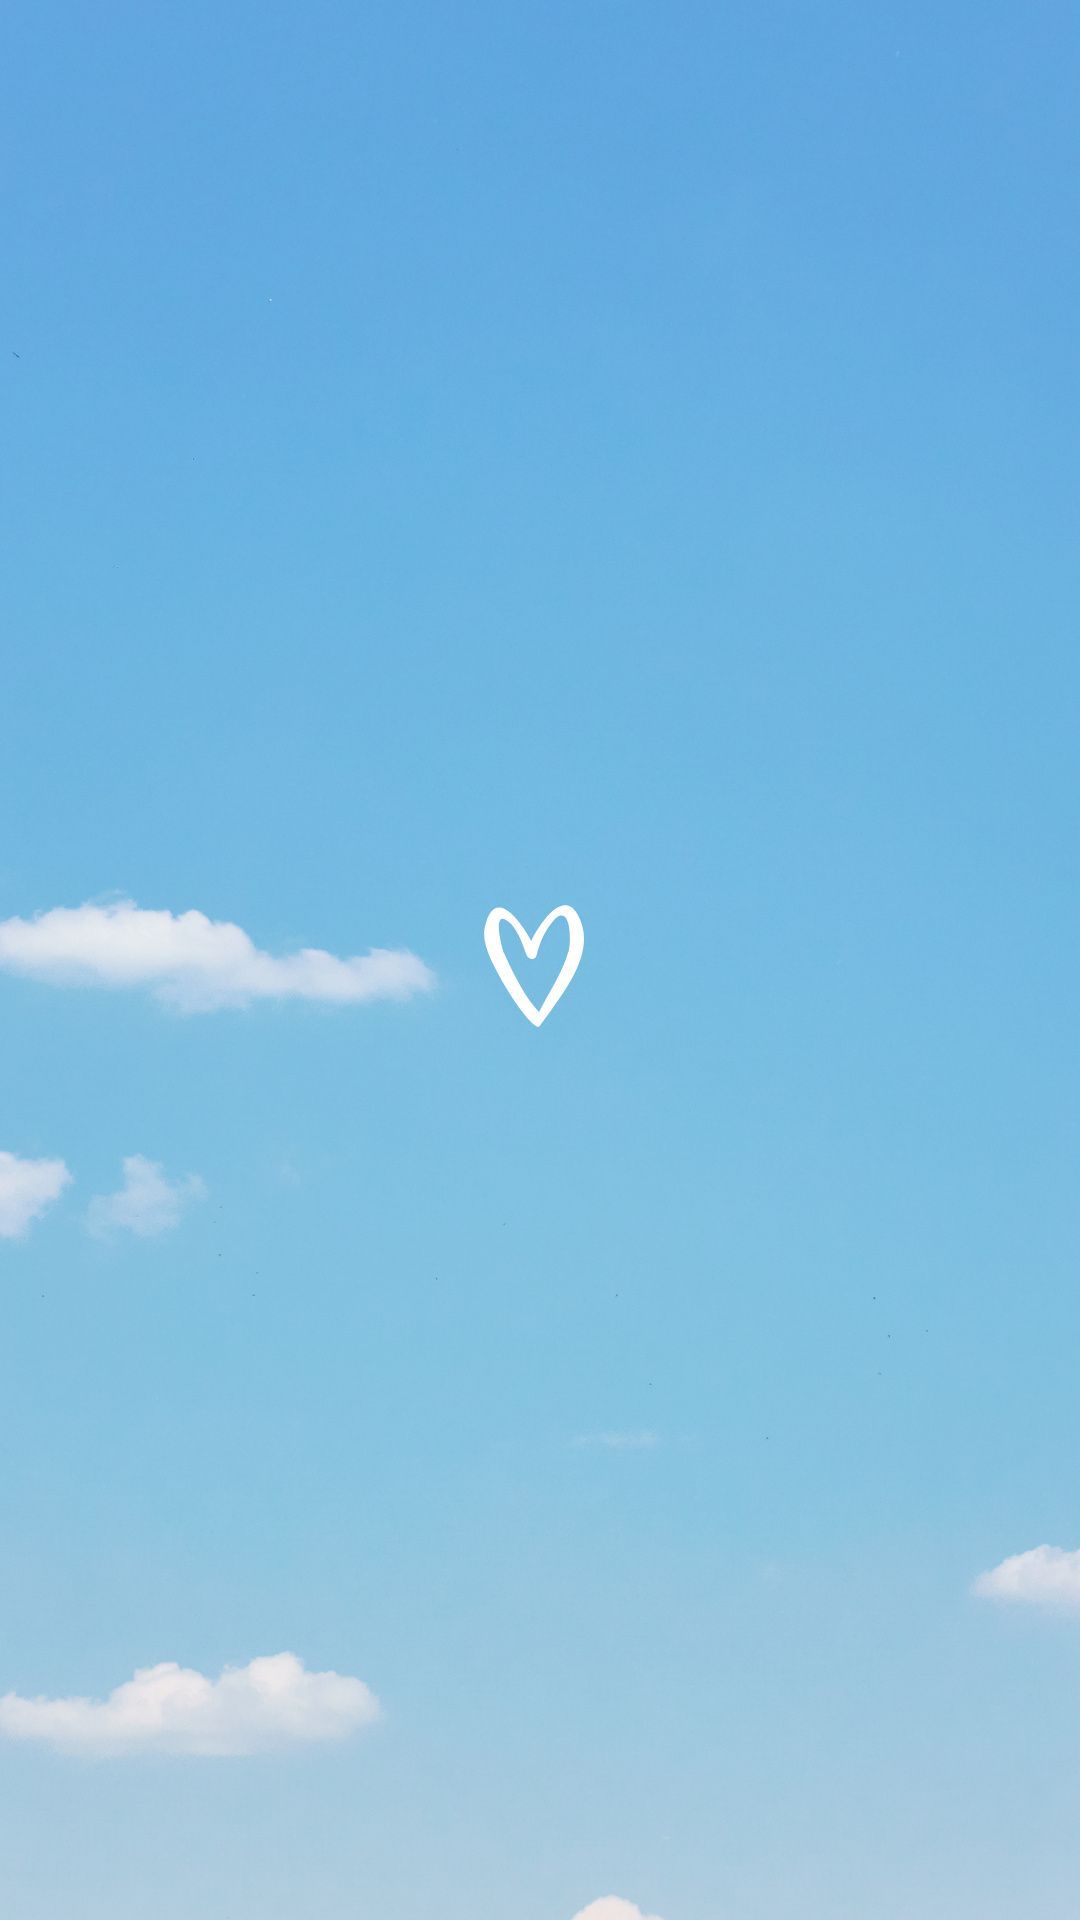 Blue and White Hearts and Stars Live Wallpaper  free download